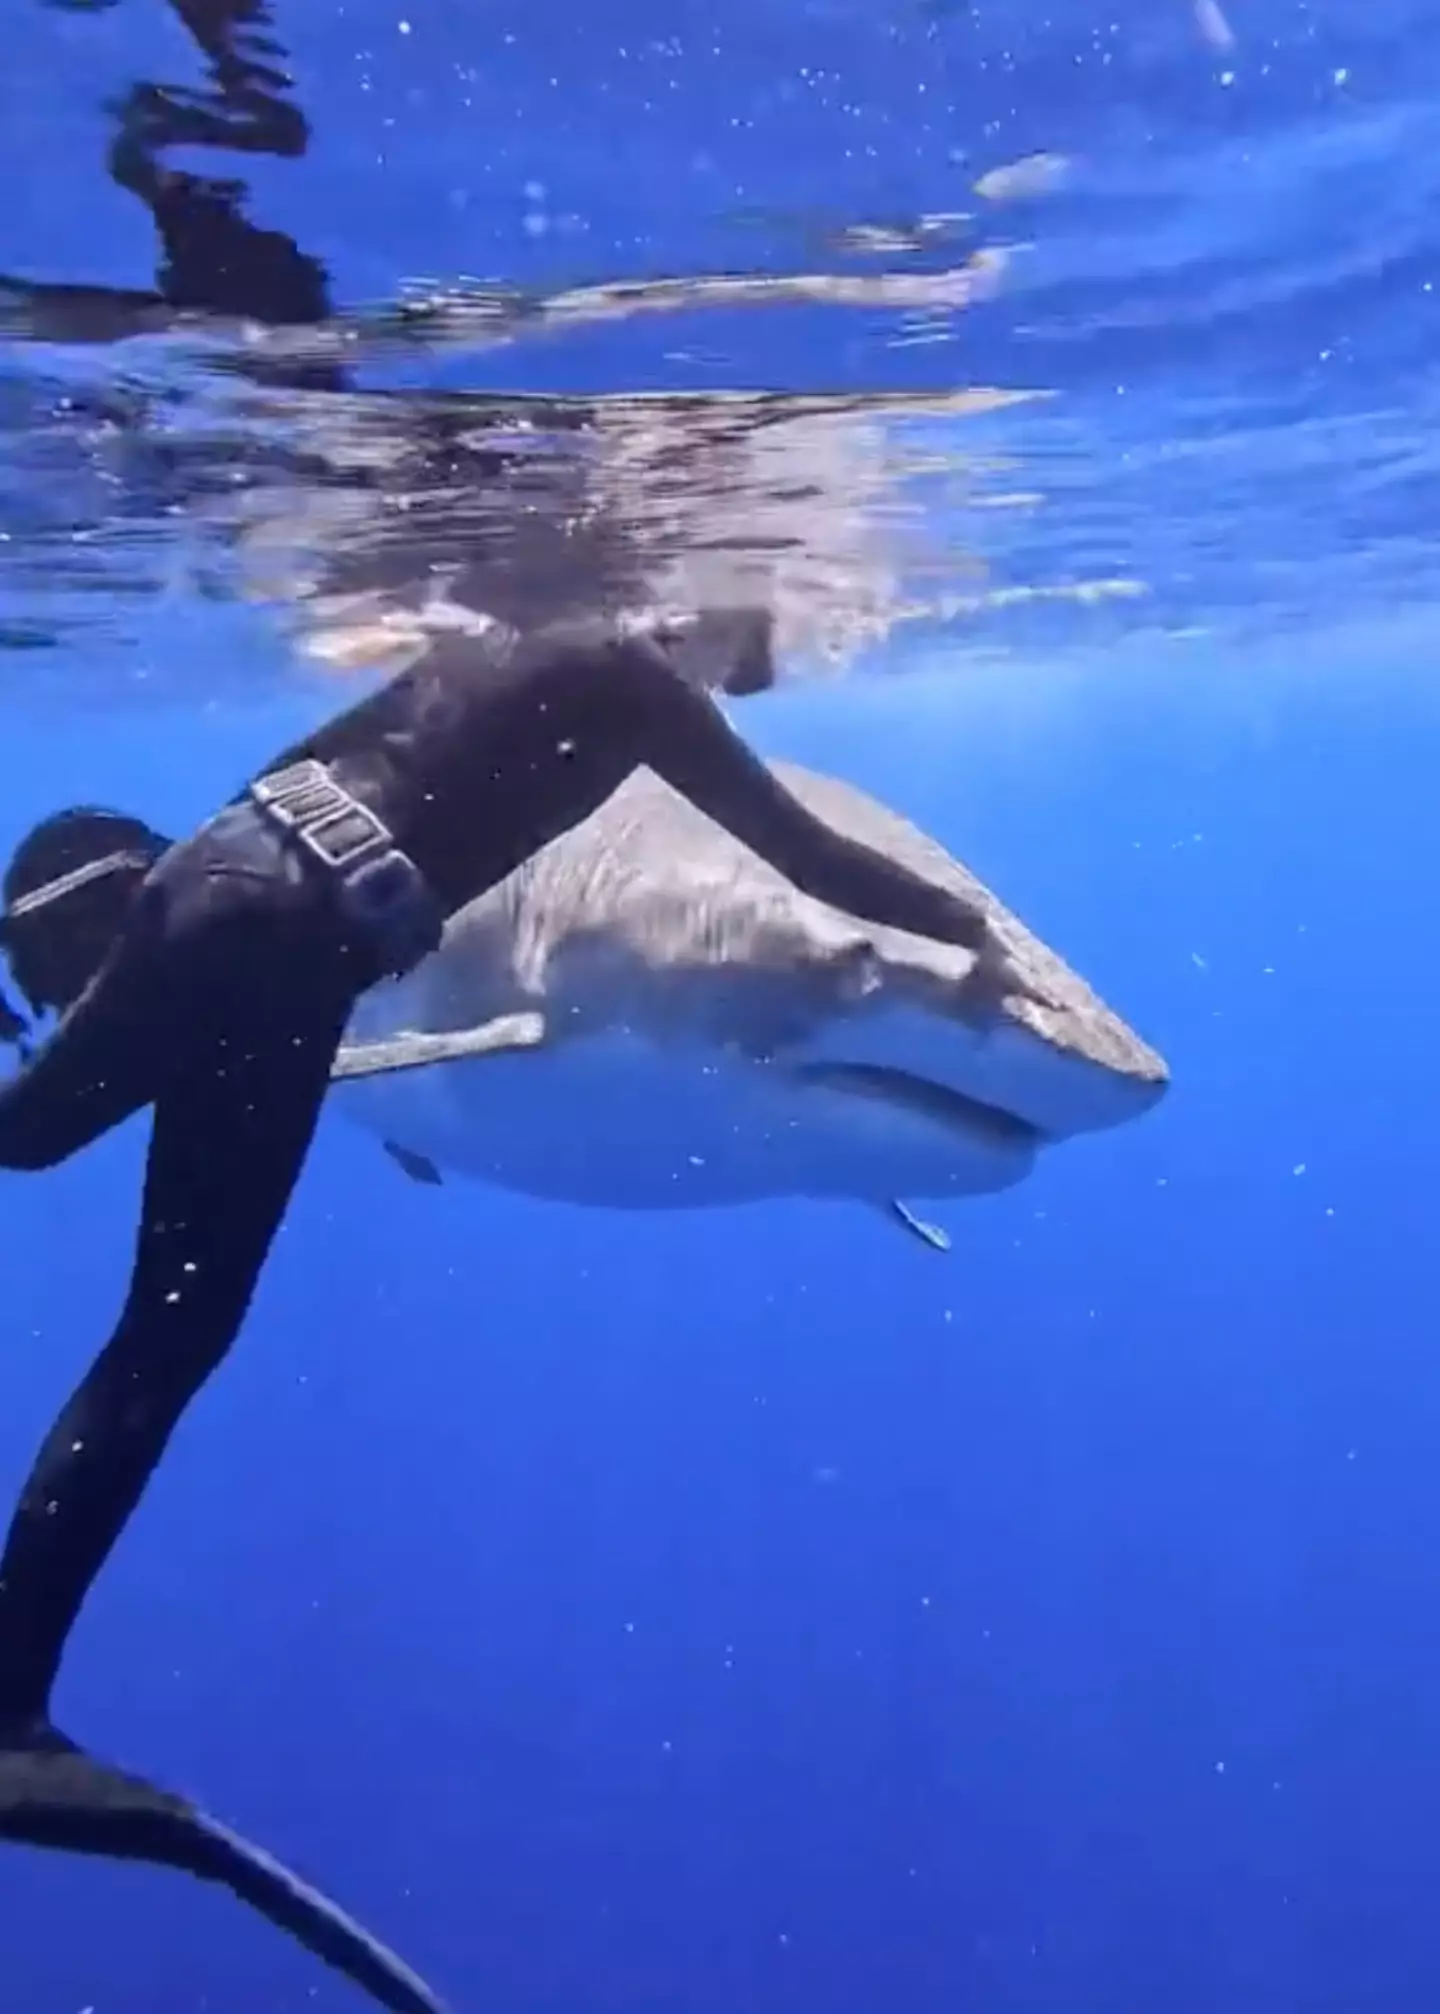 Tiger sharks can be dealt with by pushing down on their head and guiding them away.